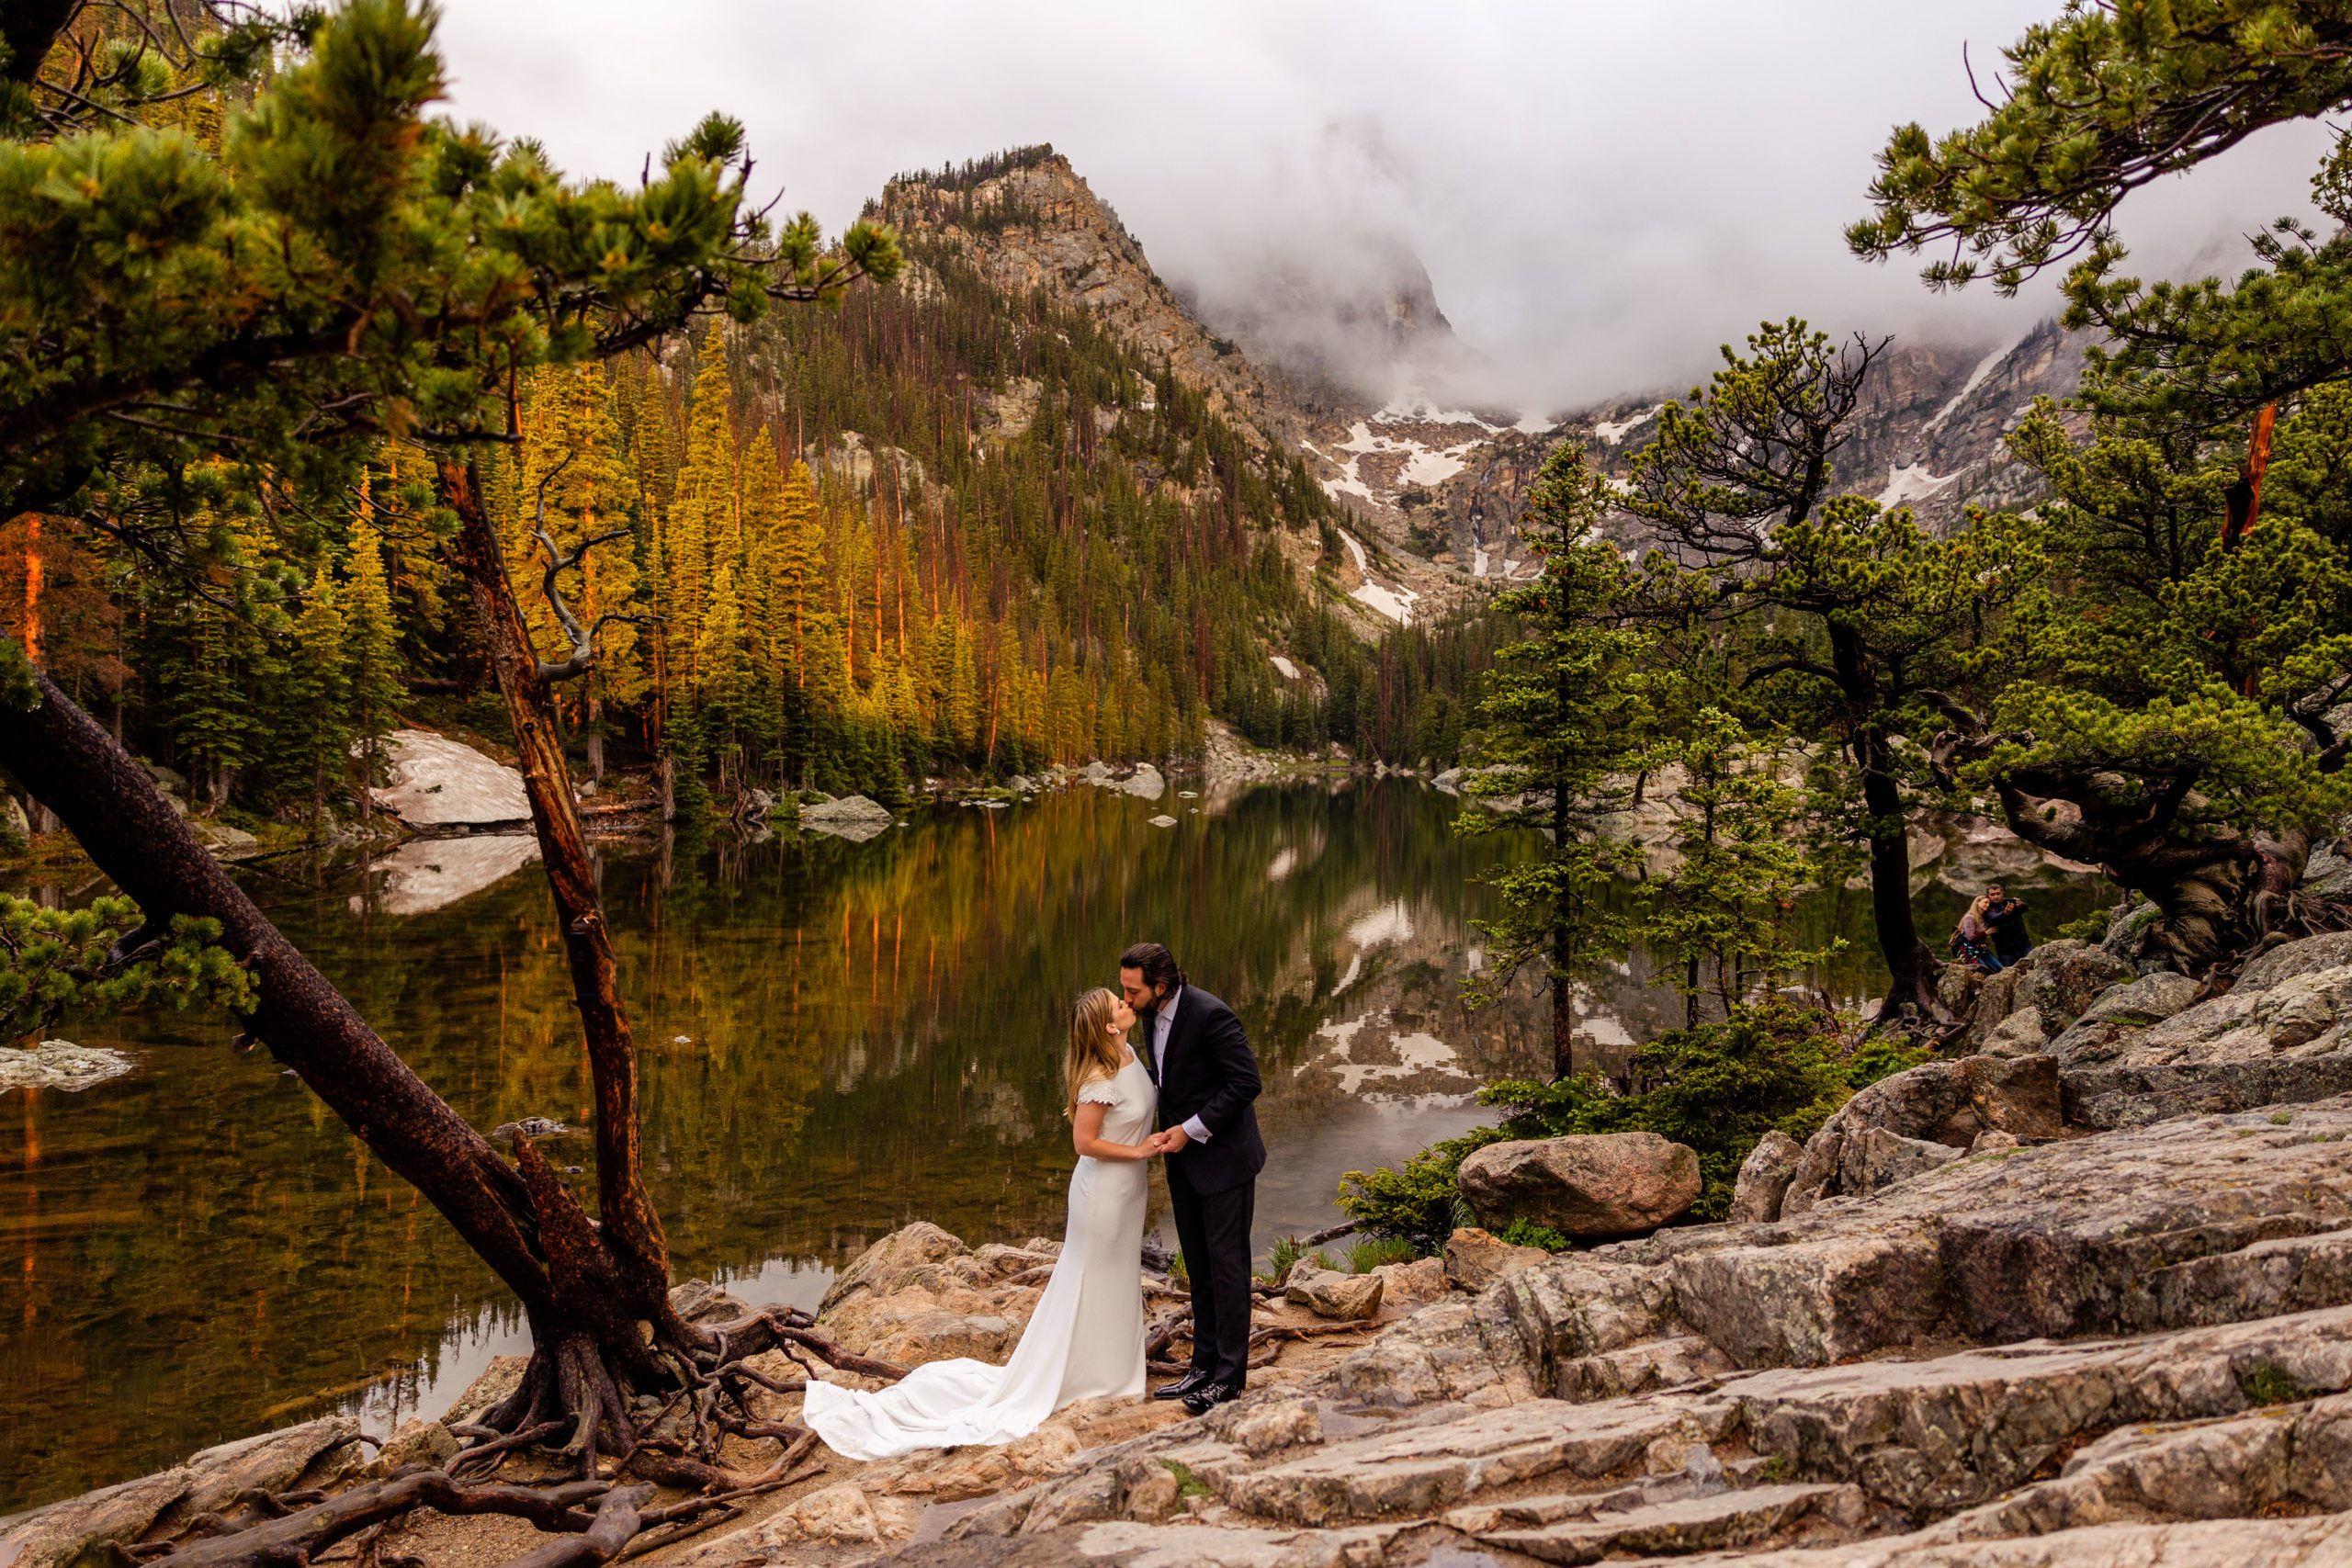 Dream Like Hiking Elopement in Rocky Mountain National Park - How many Hours do you need to hire an elopement photographer for